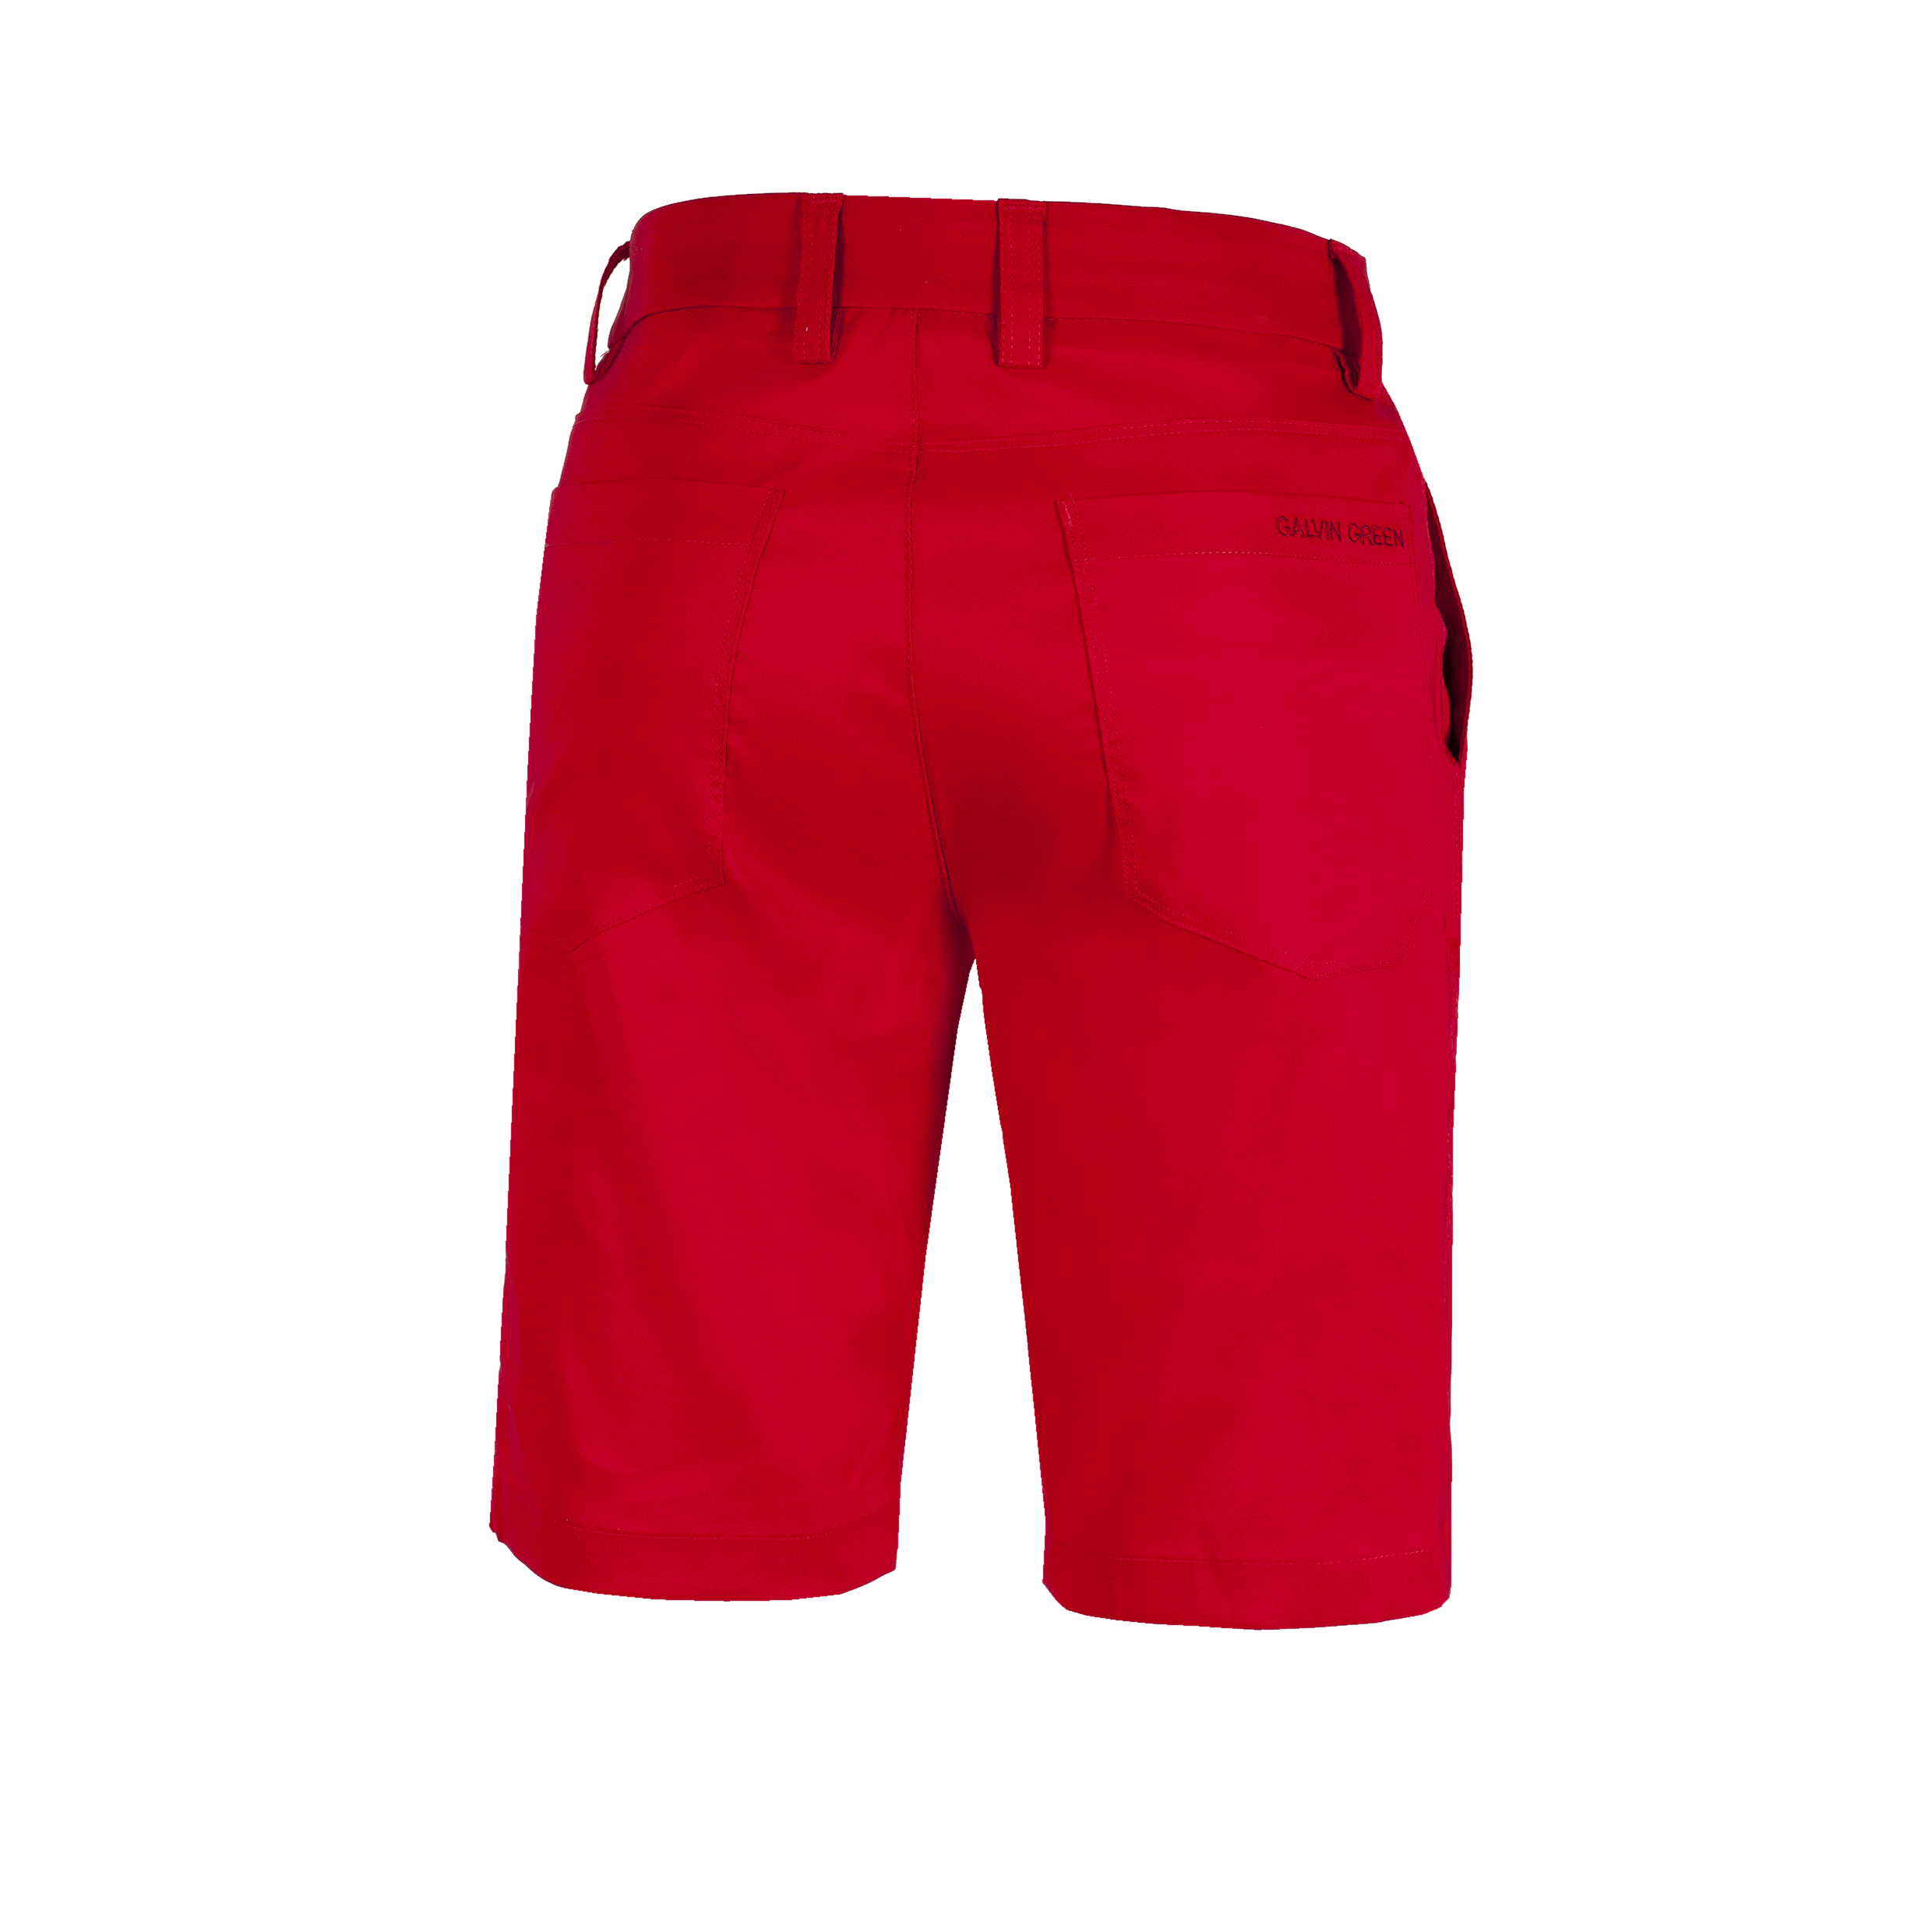 RED 'PAOLO' GOLF SHORT - MEN / SS20